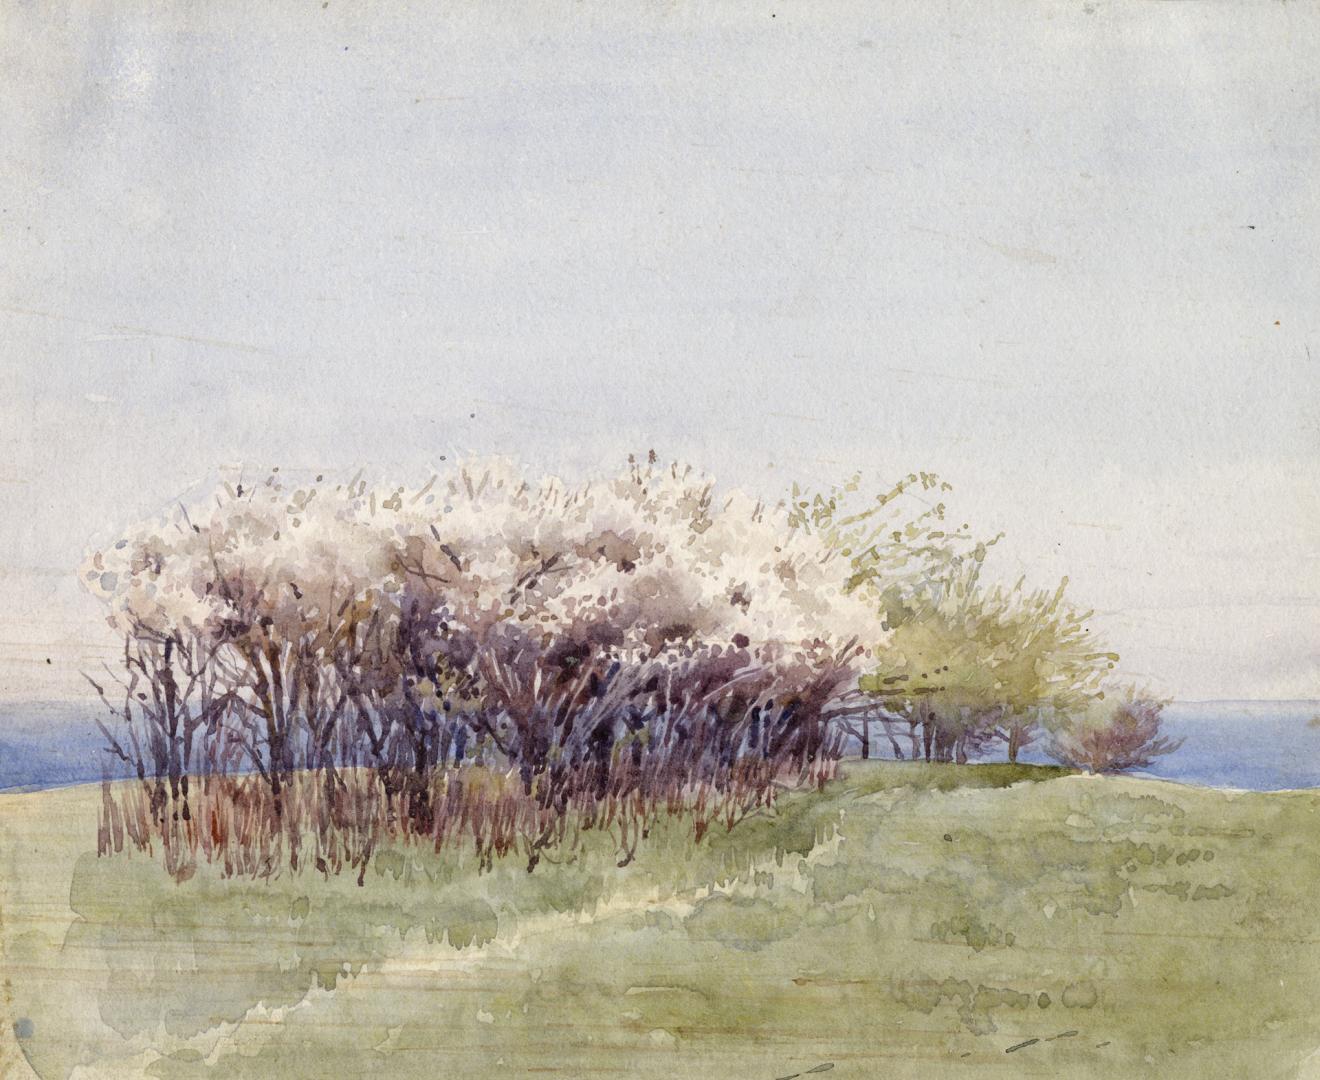 A watercolour painting of some bushes and small trees in the middle of a grassy area.